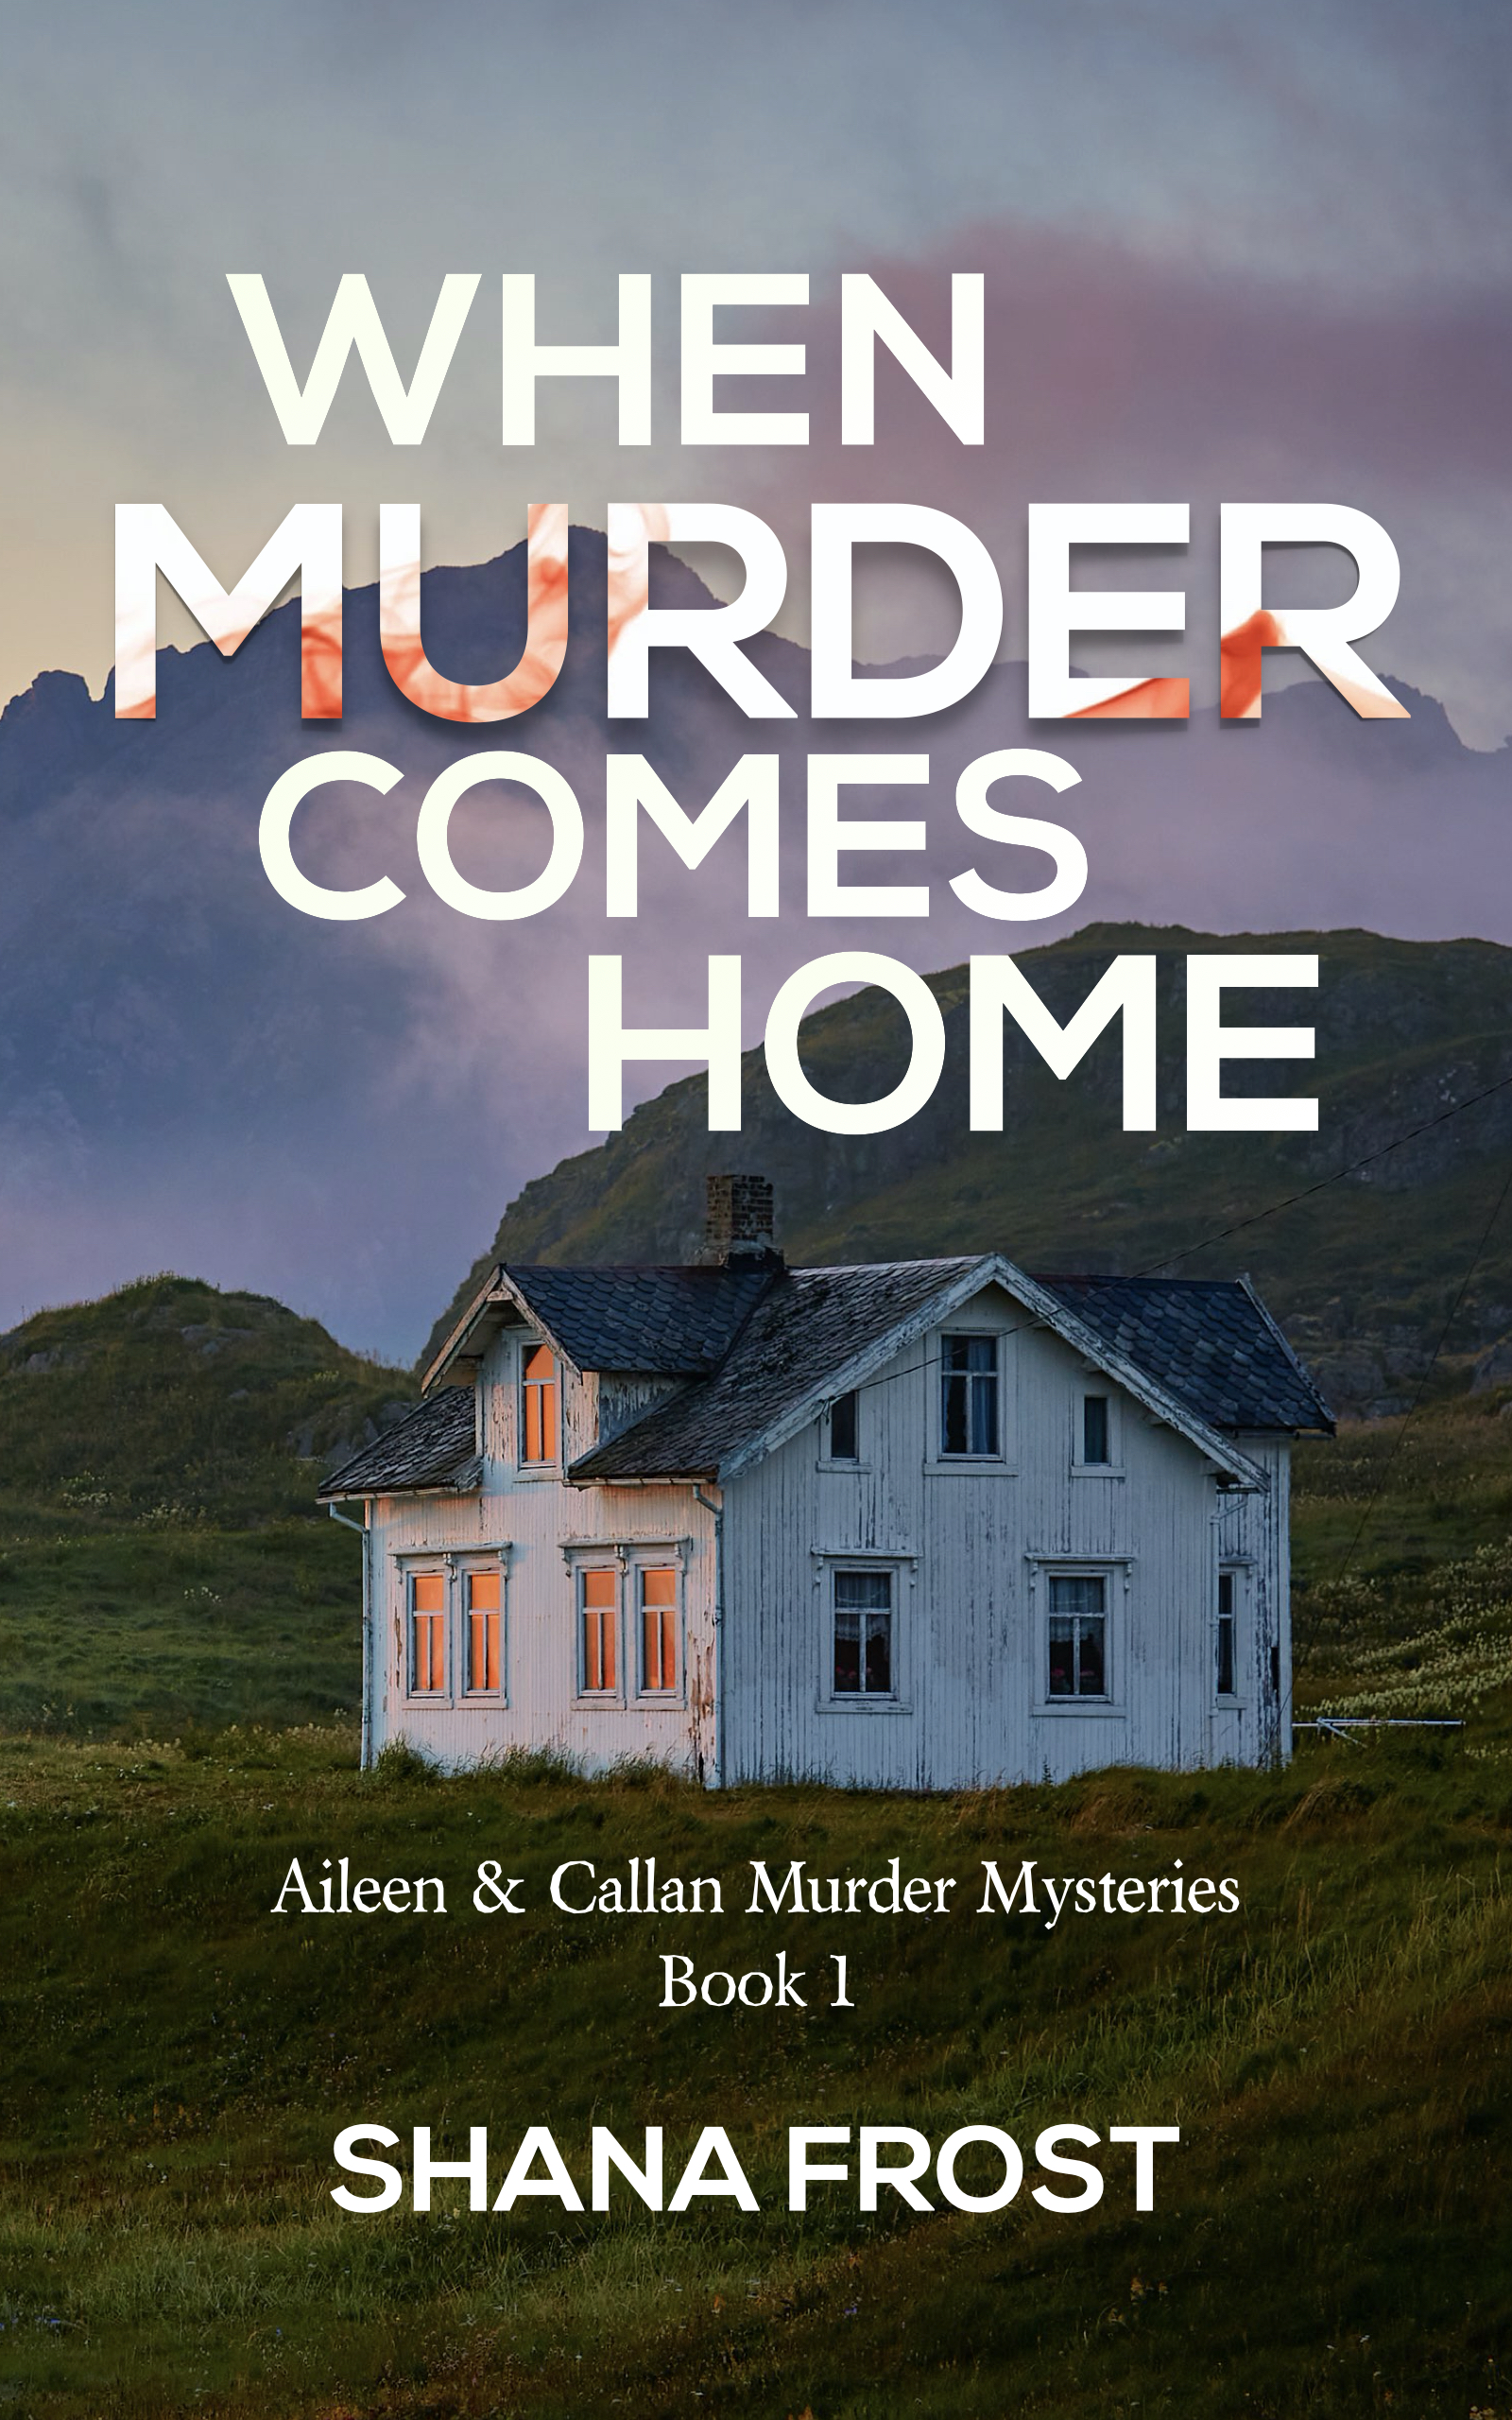 FREE: When Murder Comes Home by Shana Frost